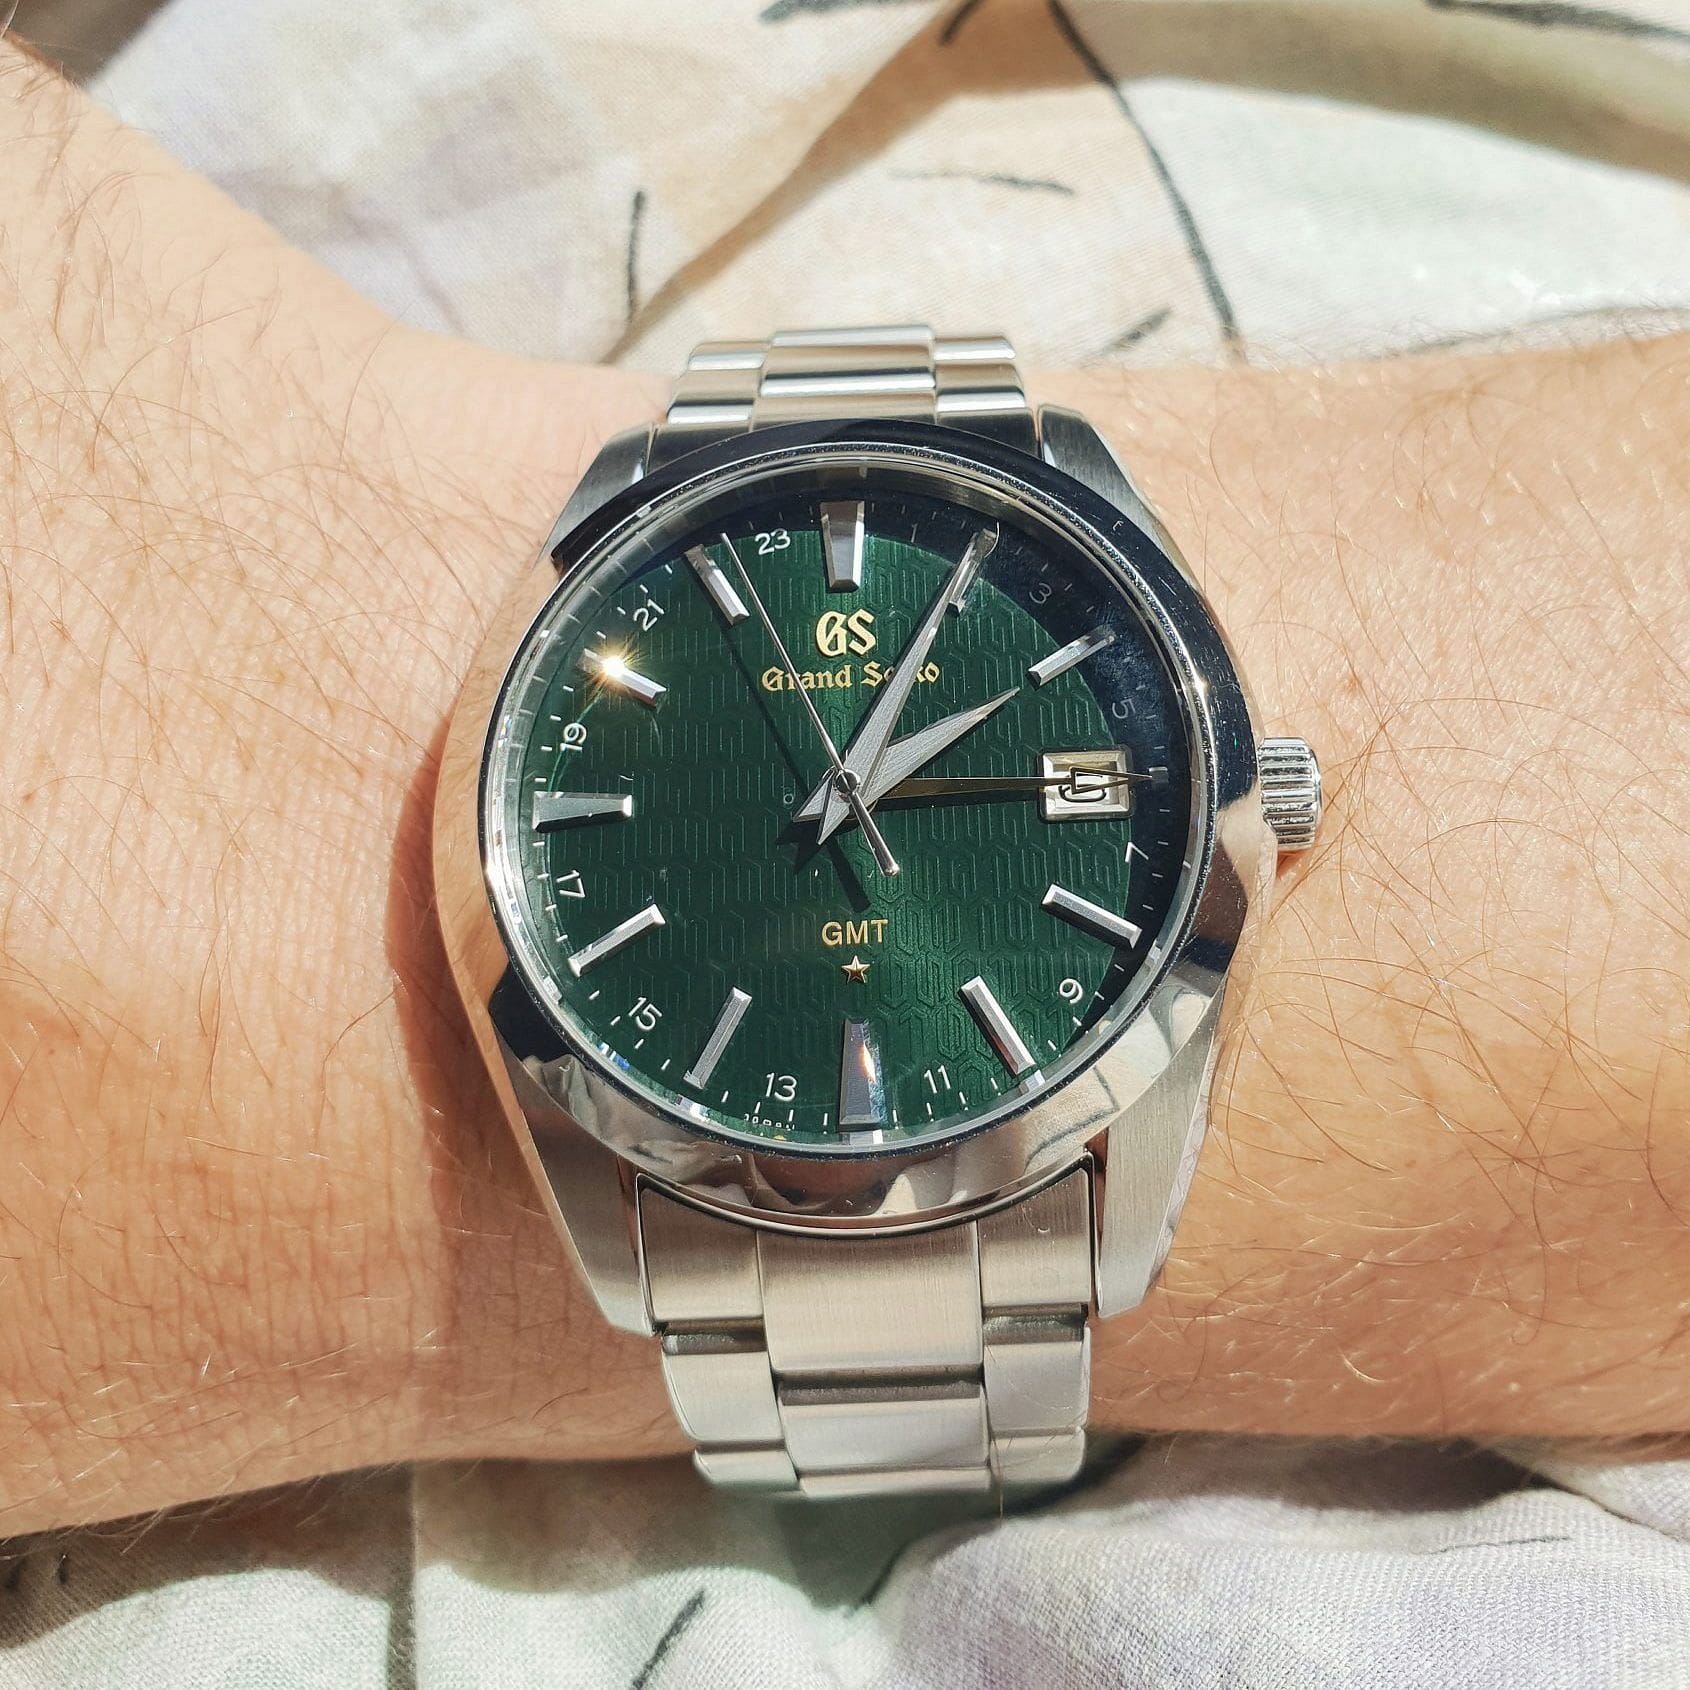 MY 6 MONTHS WITH: The Grand Seiko SBGN007